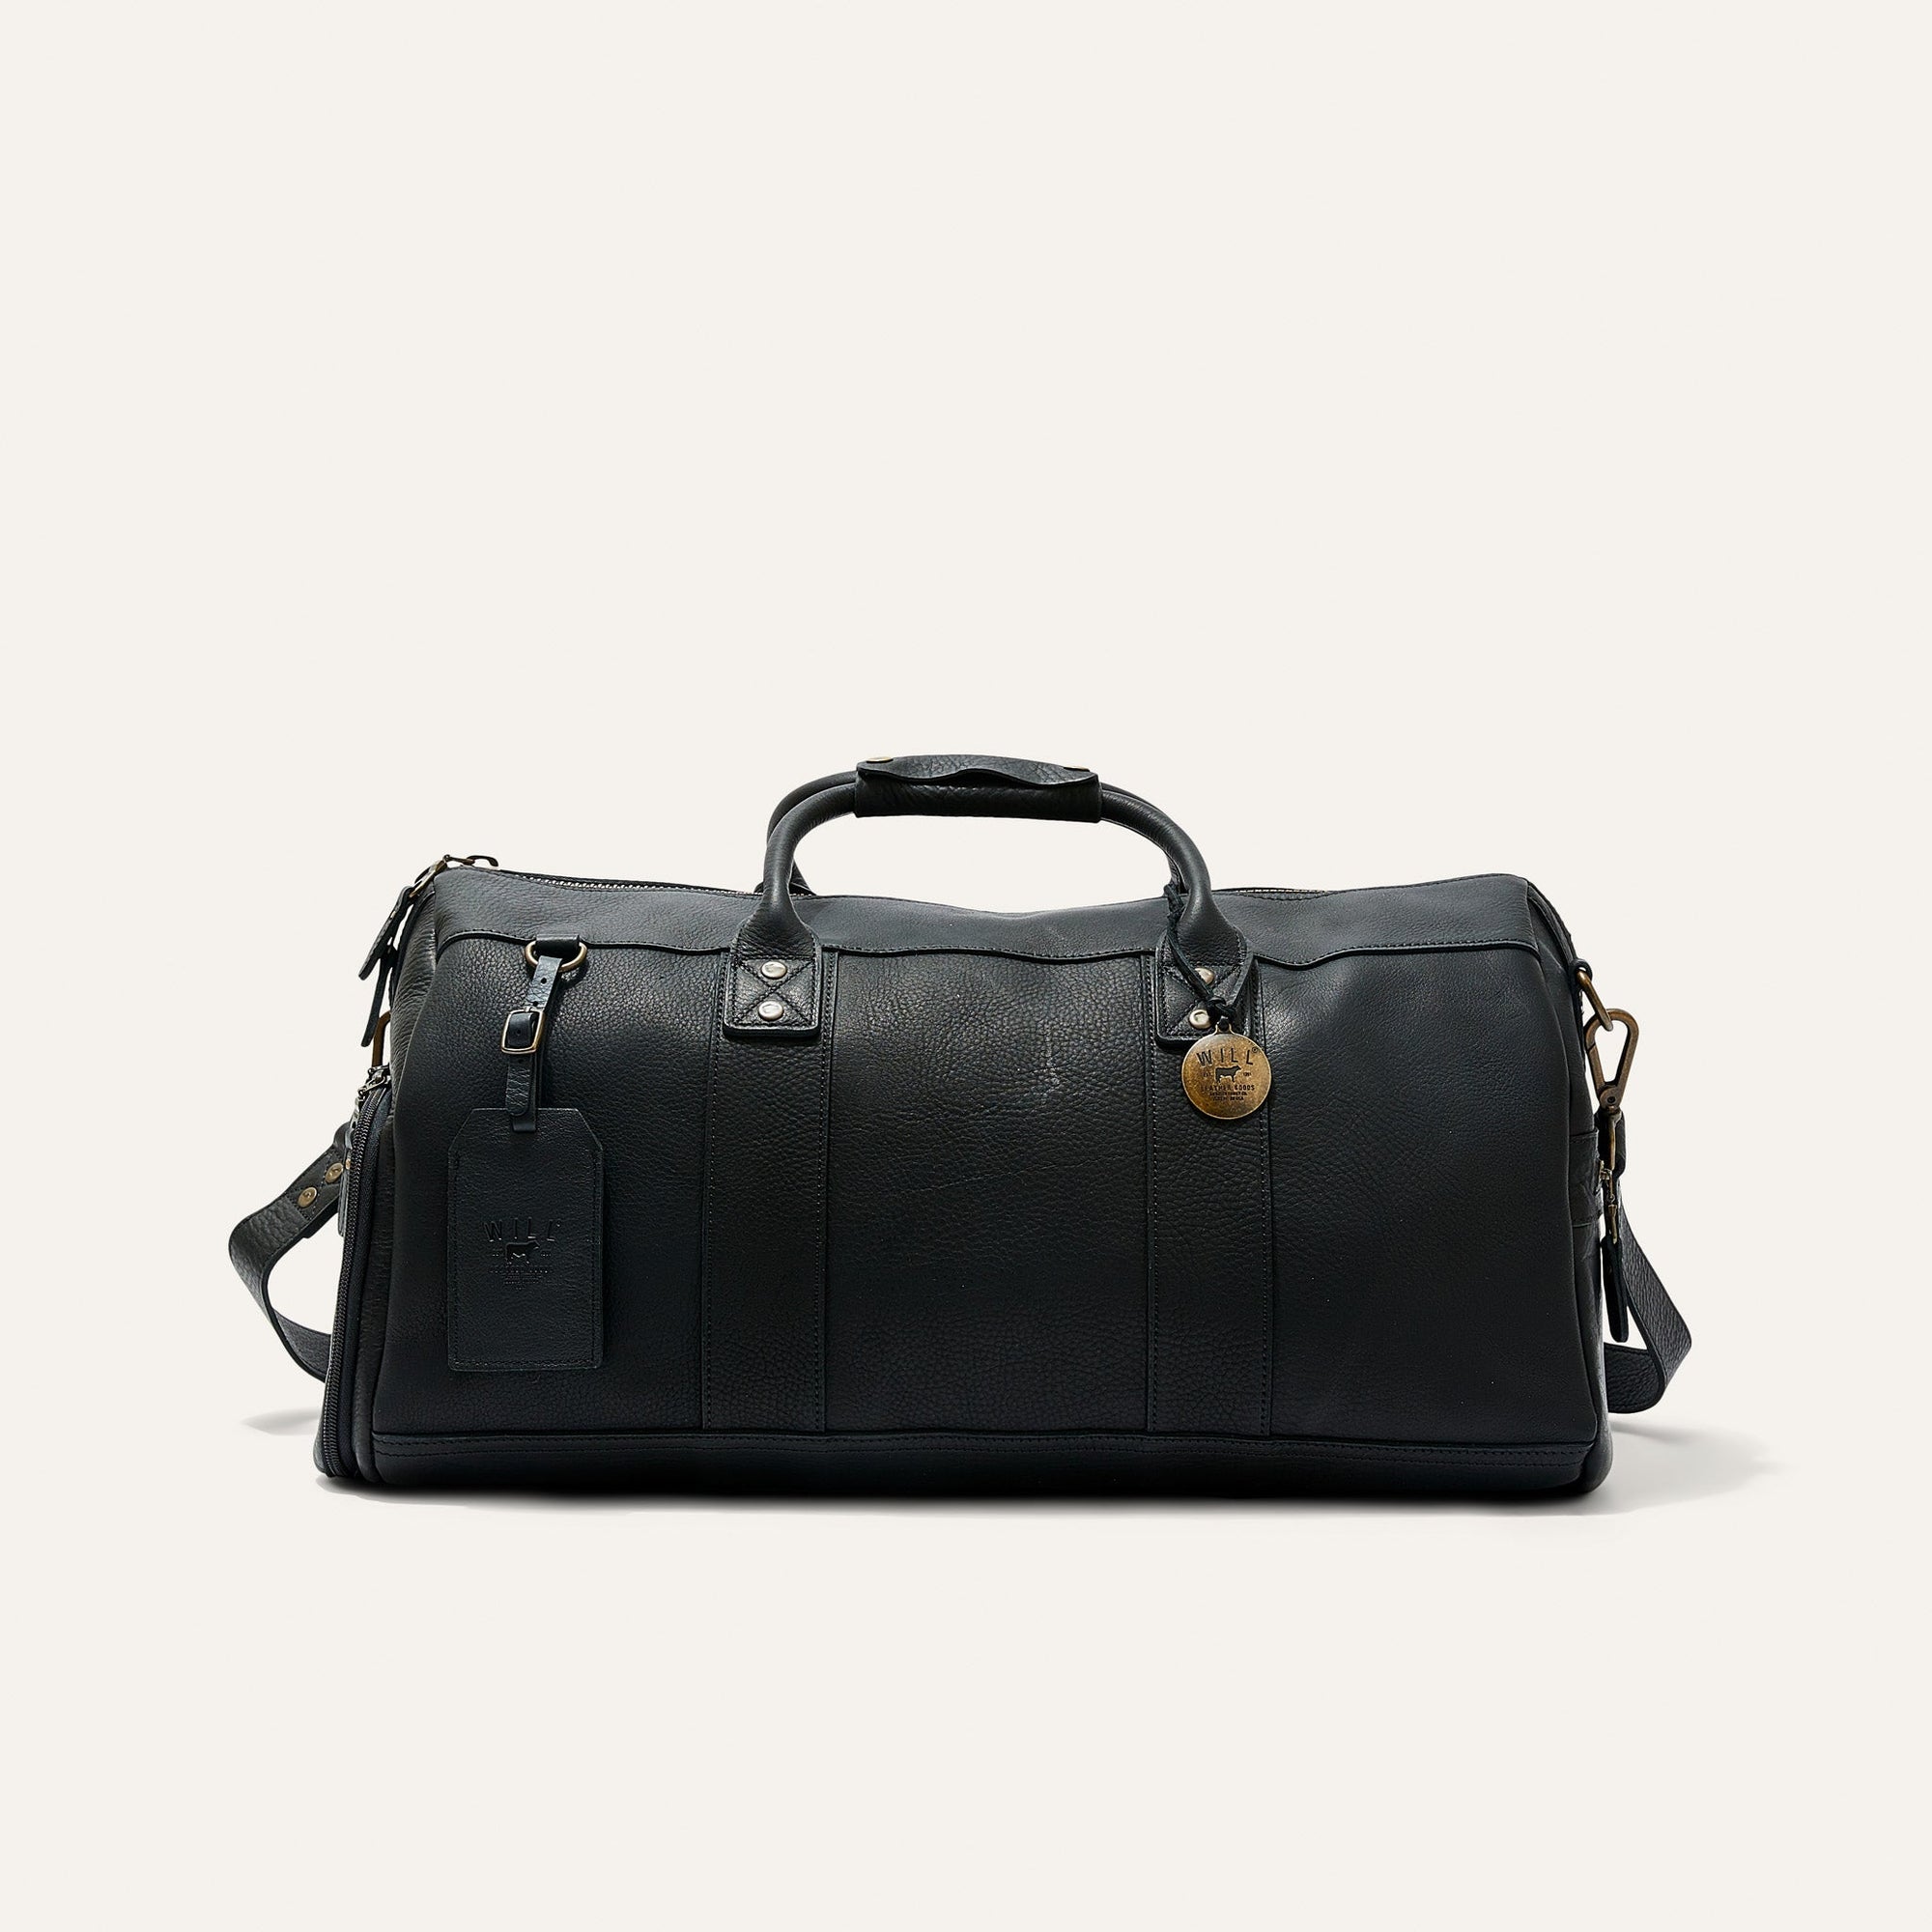 Atticus Leather Shoe Duffle in Black by Will Leather Goods